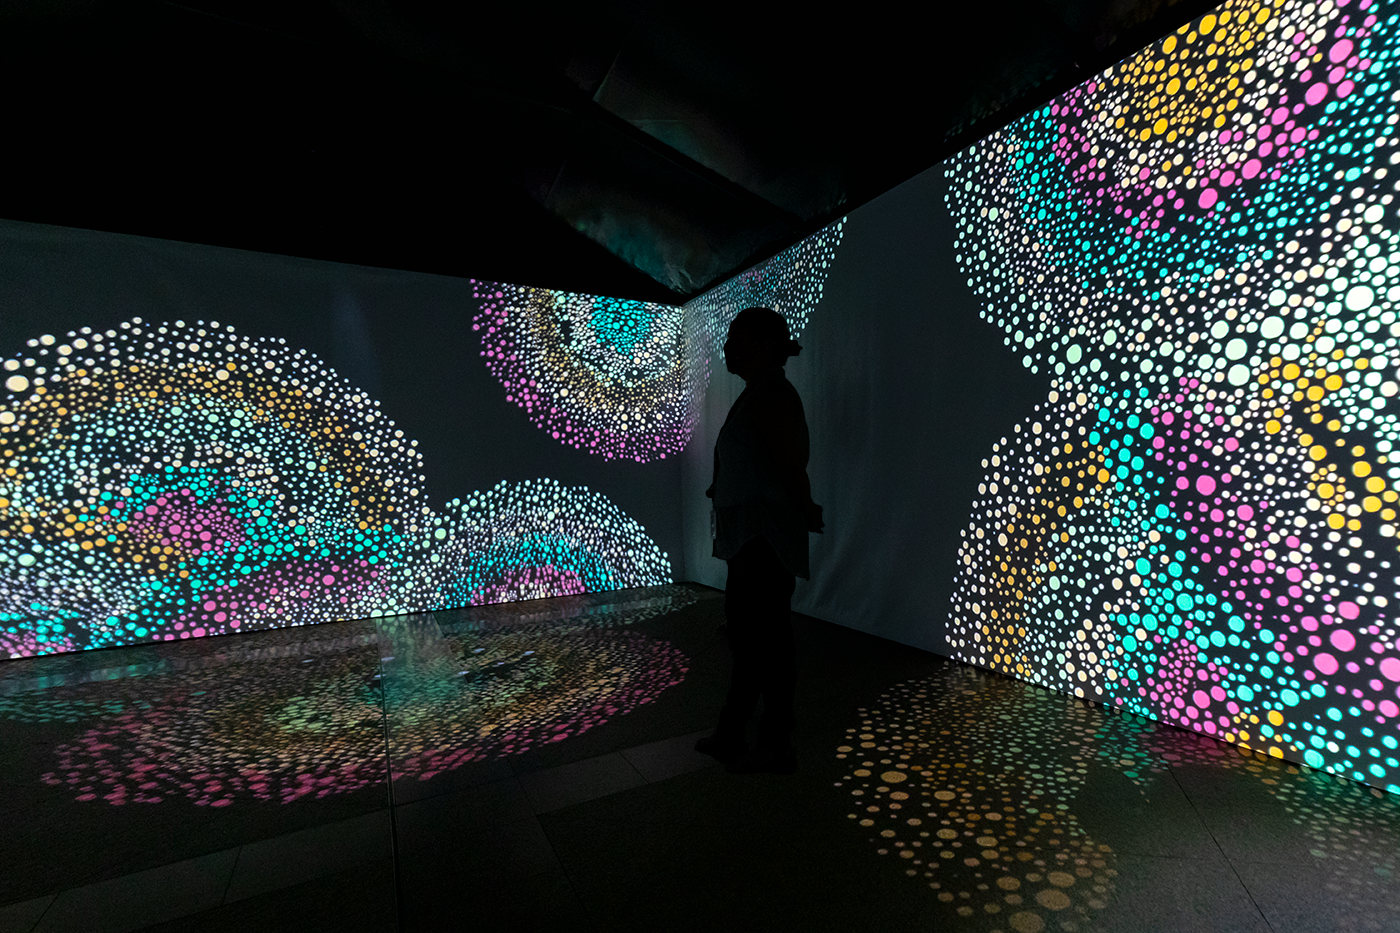 A person stands, side to camera, in silhouette before two large screens, at right angles. On the screens are projected a series of dots in pink, white, yellow and teal, forming concentric circles.